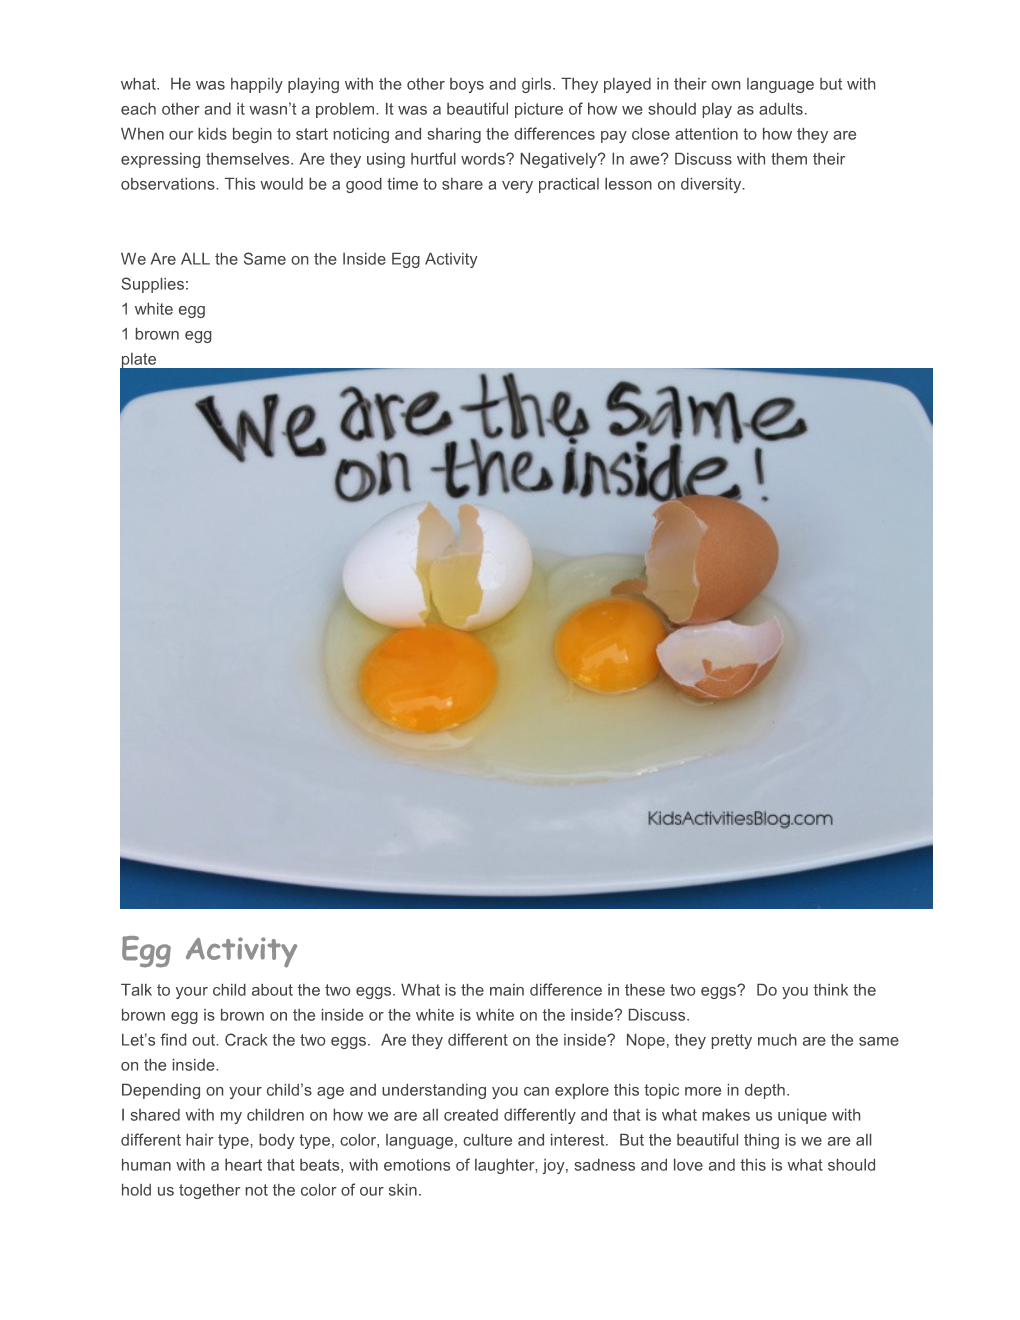 What Is Diversity? Egg Activity for Martin Luther King Jr. Day